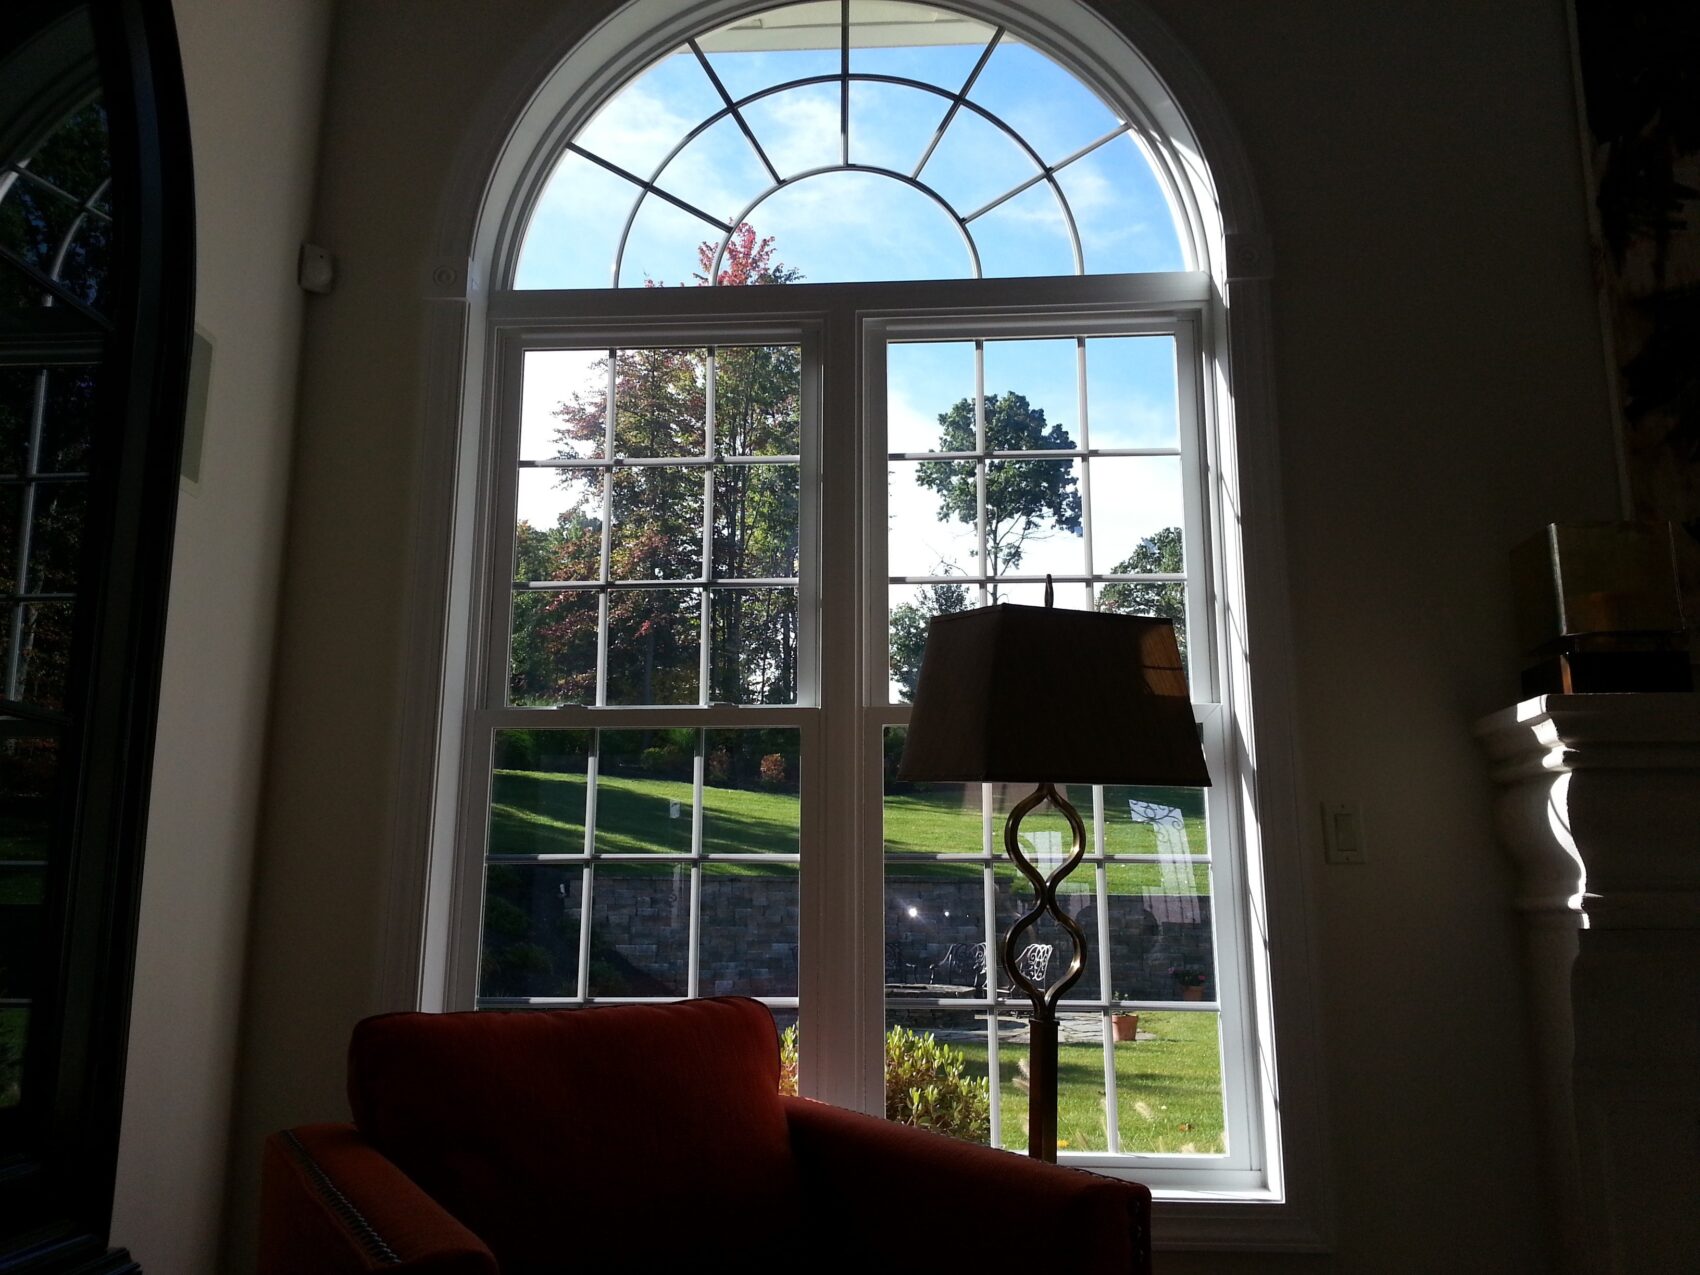 Reduce the UV Rays coming into your home with 3M Window Film. Contact Sun Control Plus for a free consultation around Lehigh Valley Area and Pocono Mountains.